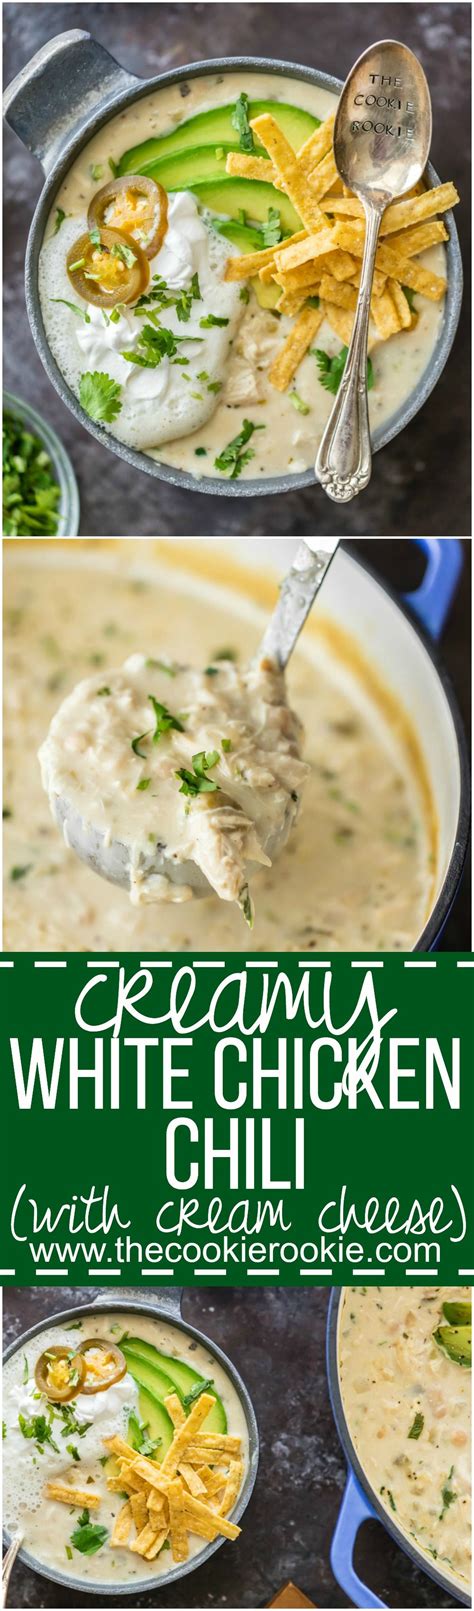 From delicious slow cooker dishes to flavorful dips find a chili recipe for any occasion! CREAMY WHITE CHICKEN CHILI made with CREAM CHEESE is the ...